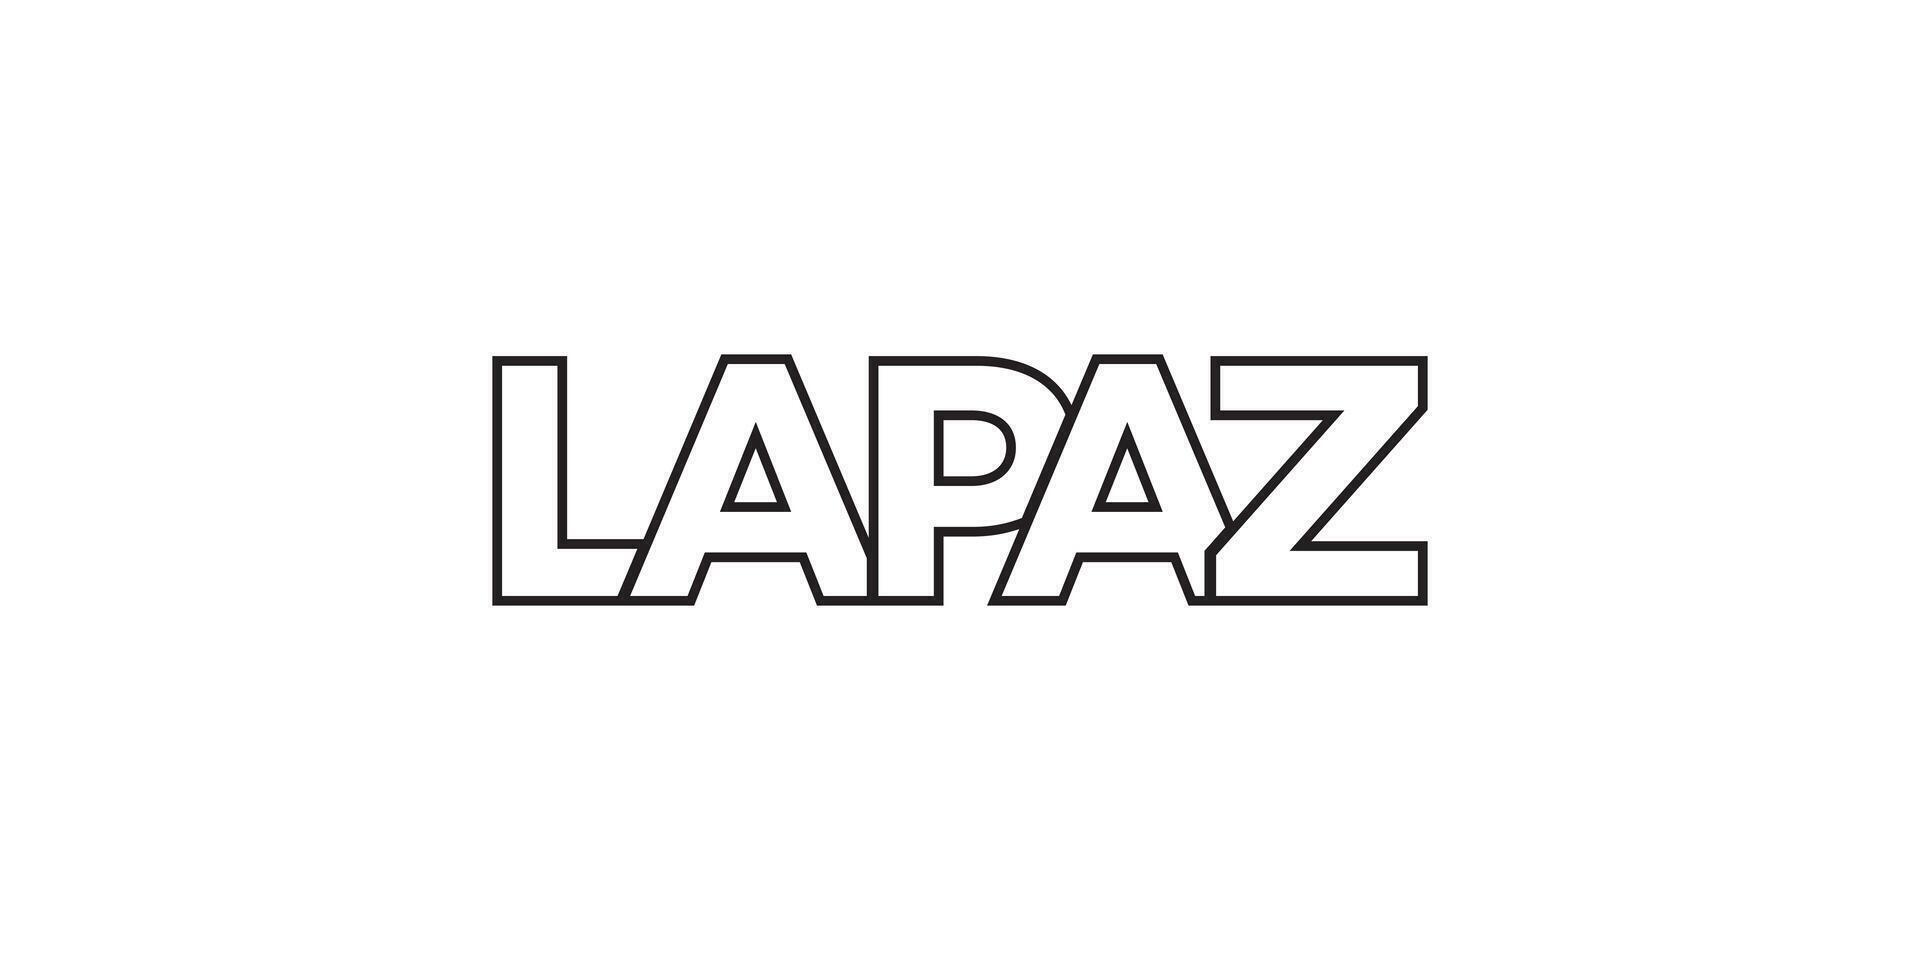 La Paz in the Mexico emblem. The design features a geometric style, vector illustration with bold typography in a modern font. The graphic slogan lettering.